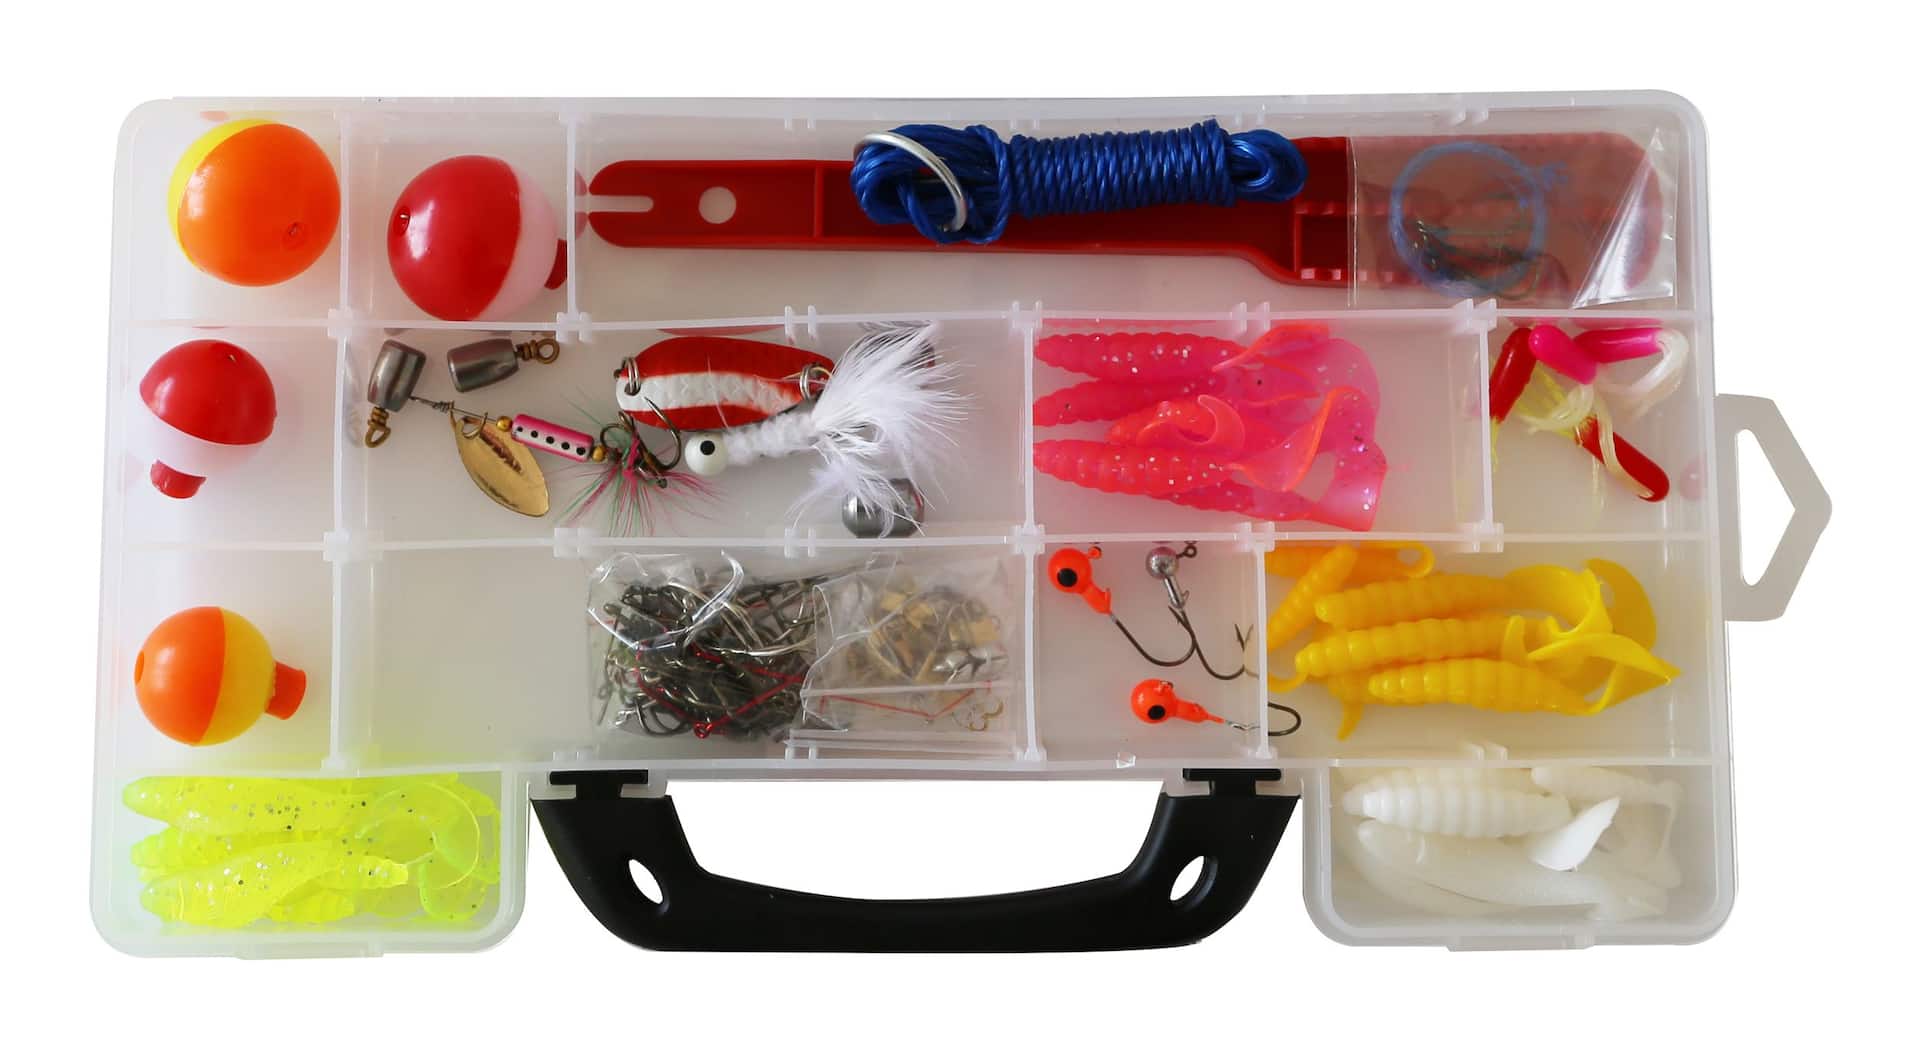 Red Wolf Trout Lure Kit, 120-pc